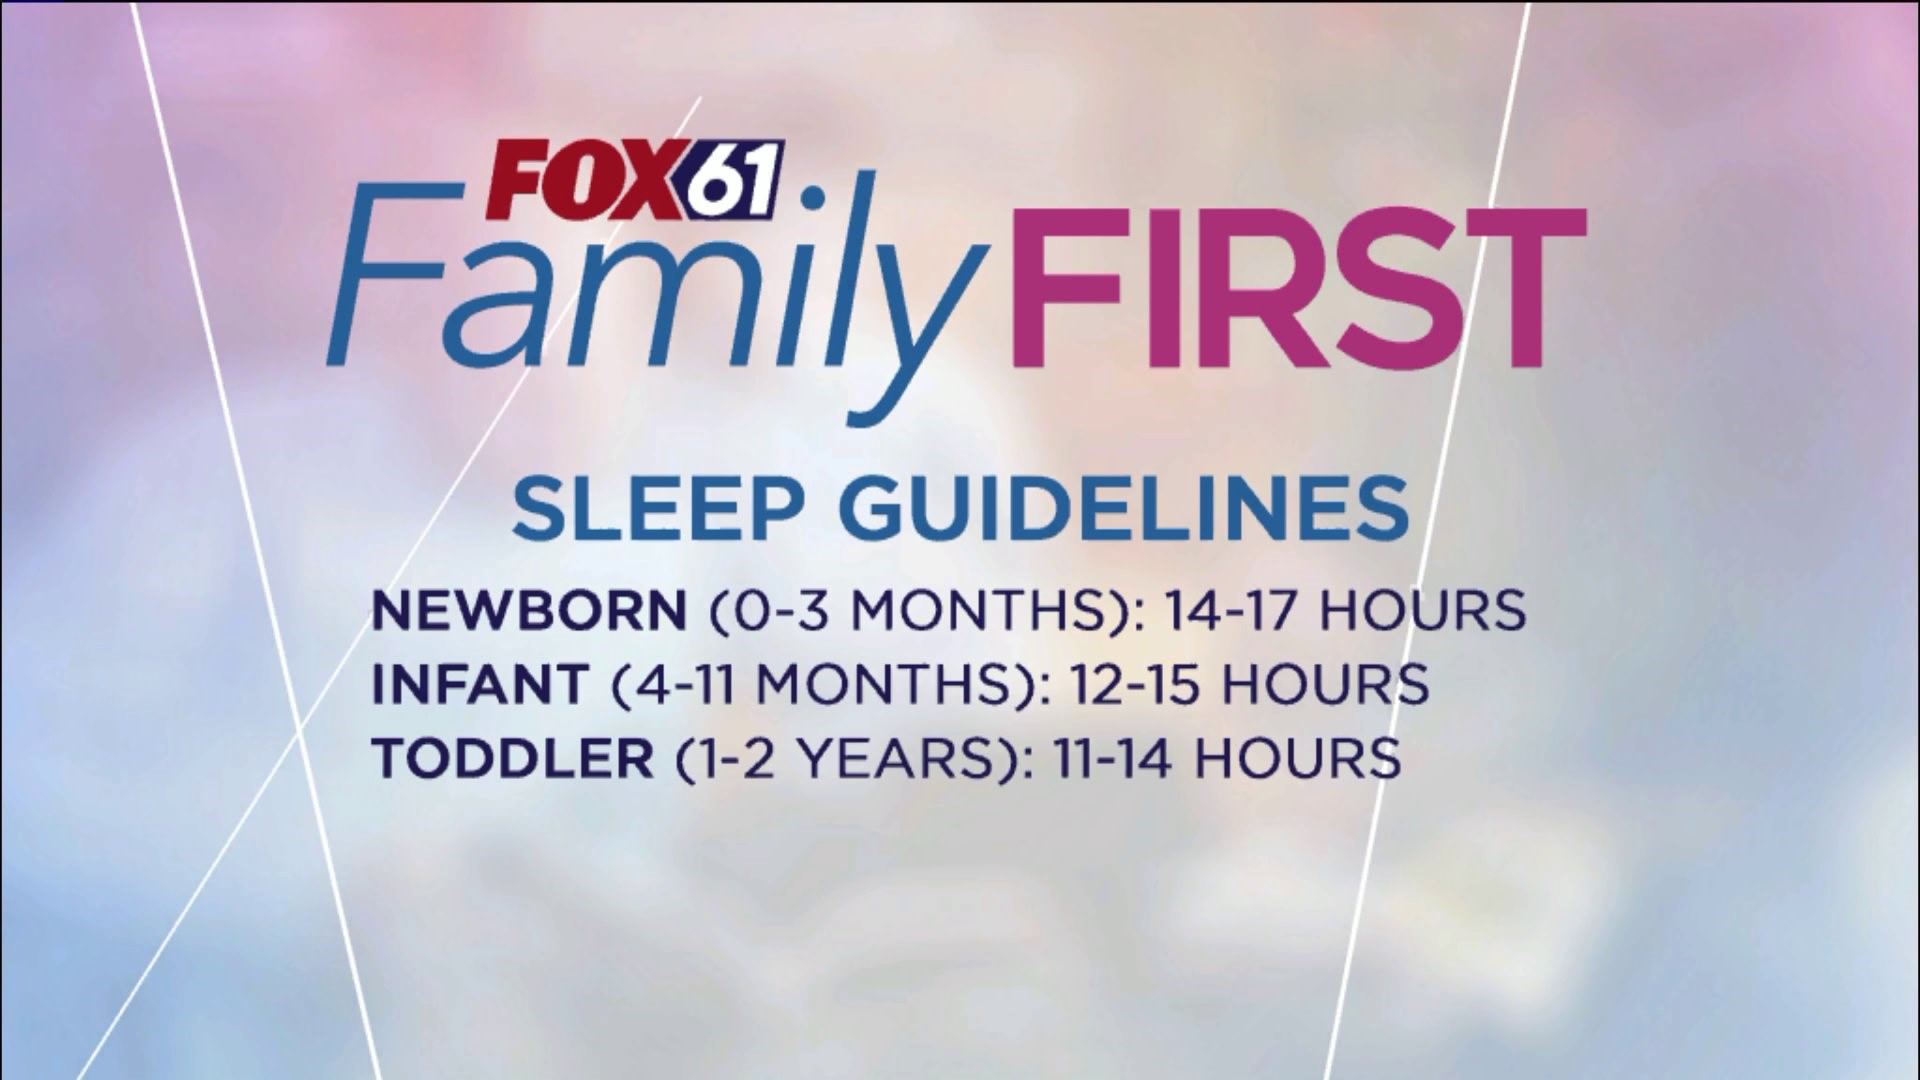 FOX61 Family First: Sleep guidelines